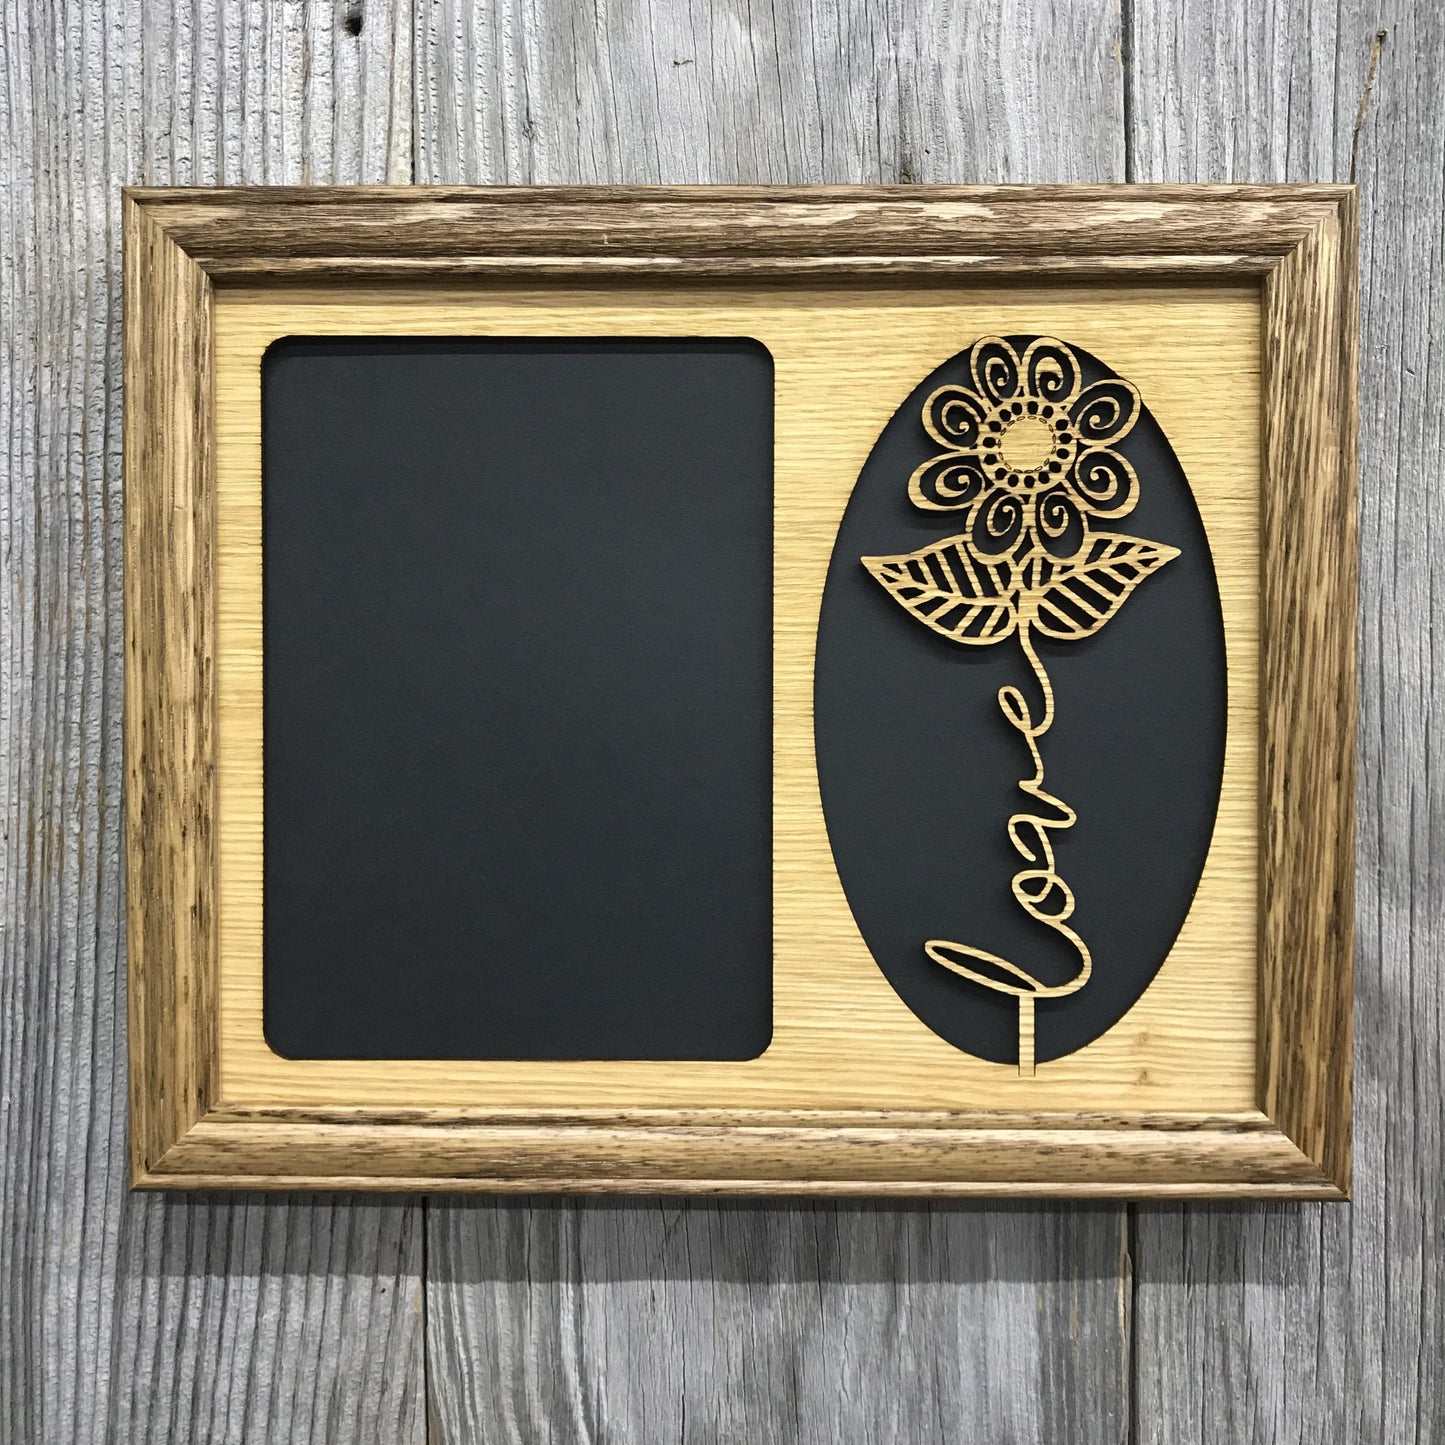 Love Flower Picture Frame - 8x10 Frame Holds 5x7 Photo